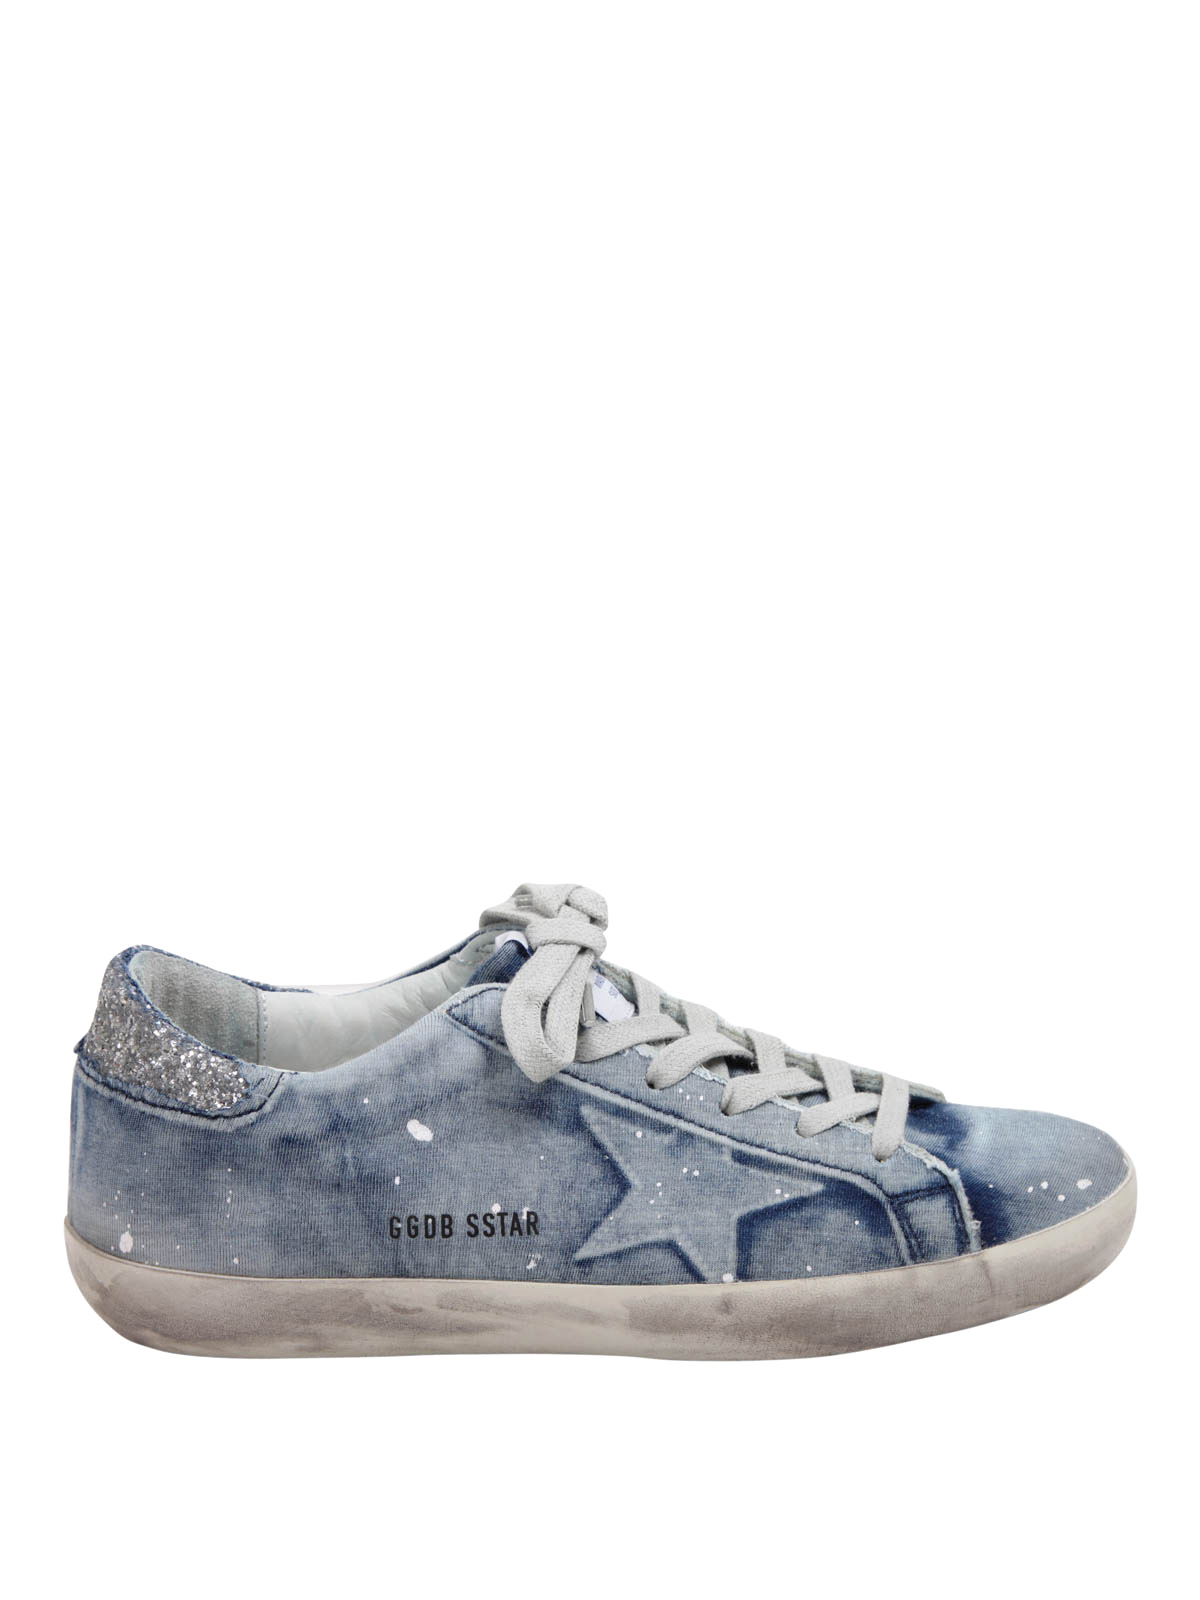 Trainers Golden Goose - Denim-leather Super Star sneakers - G30WS590A97